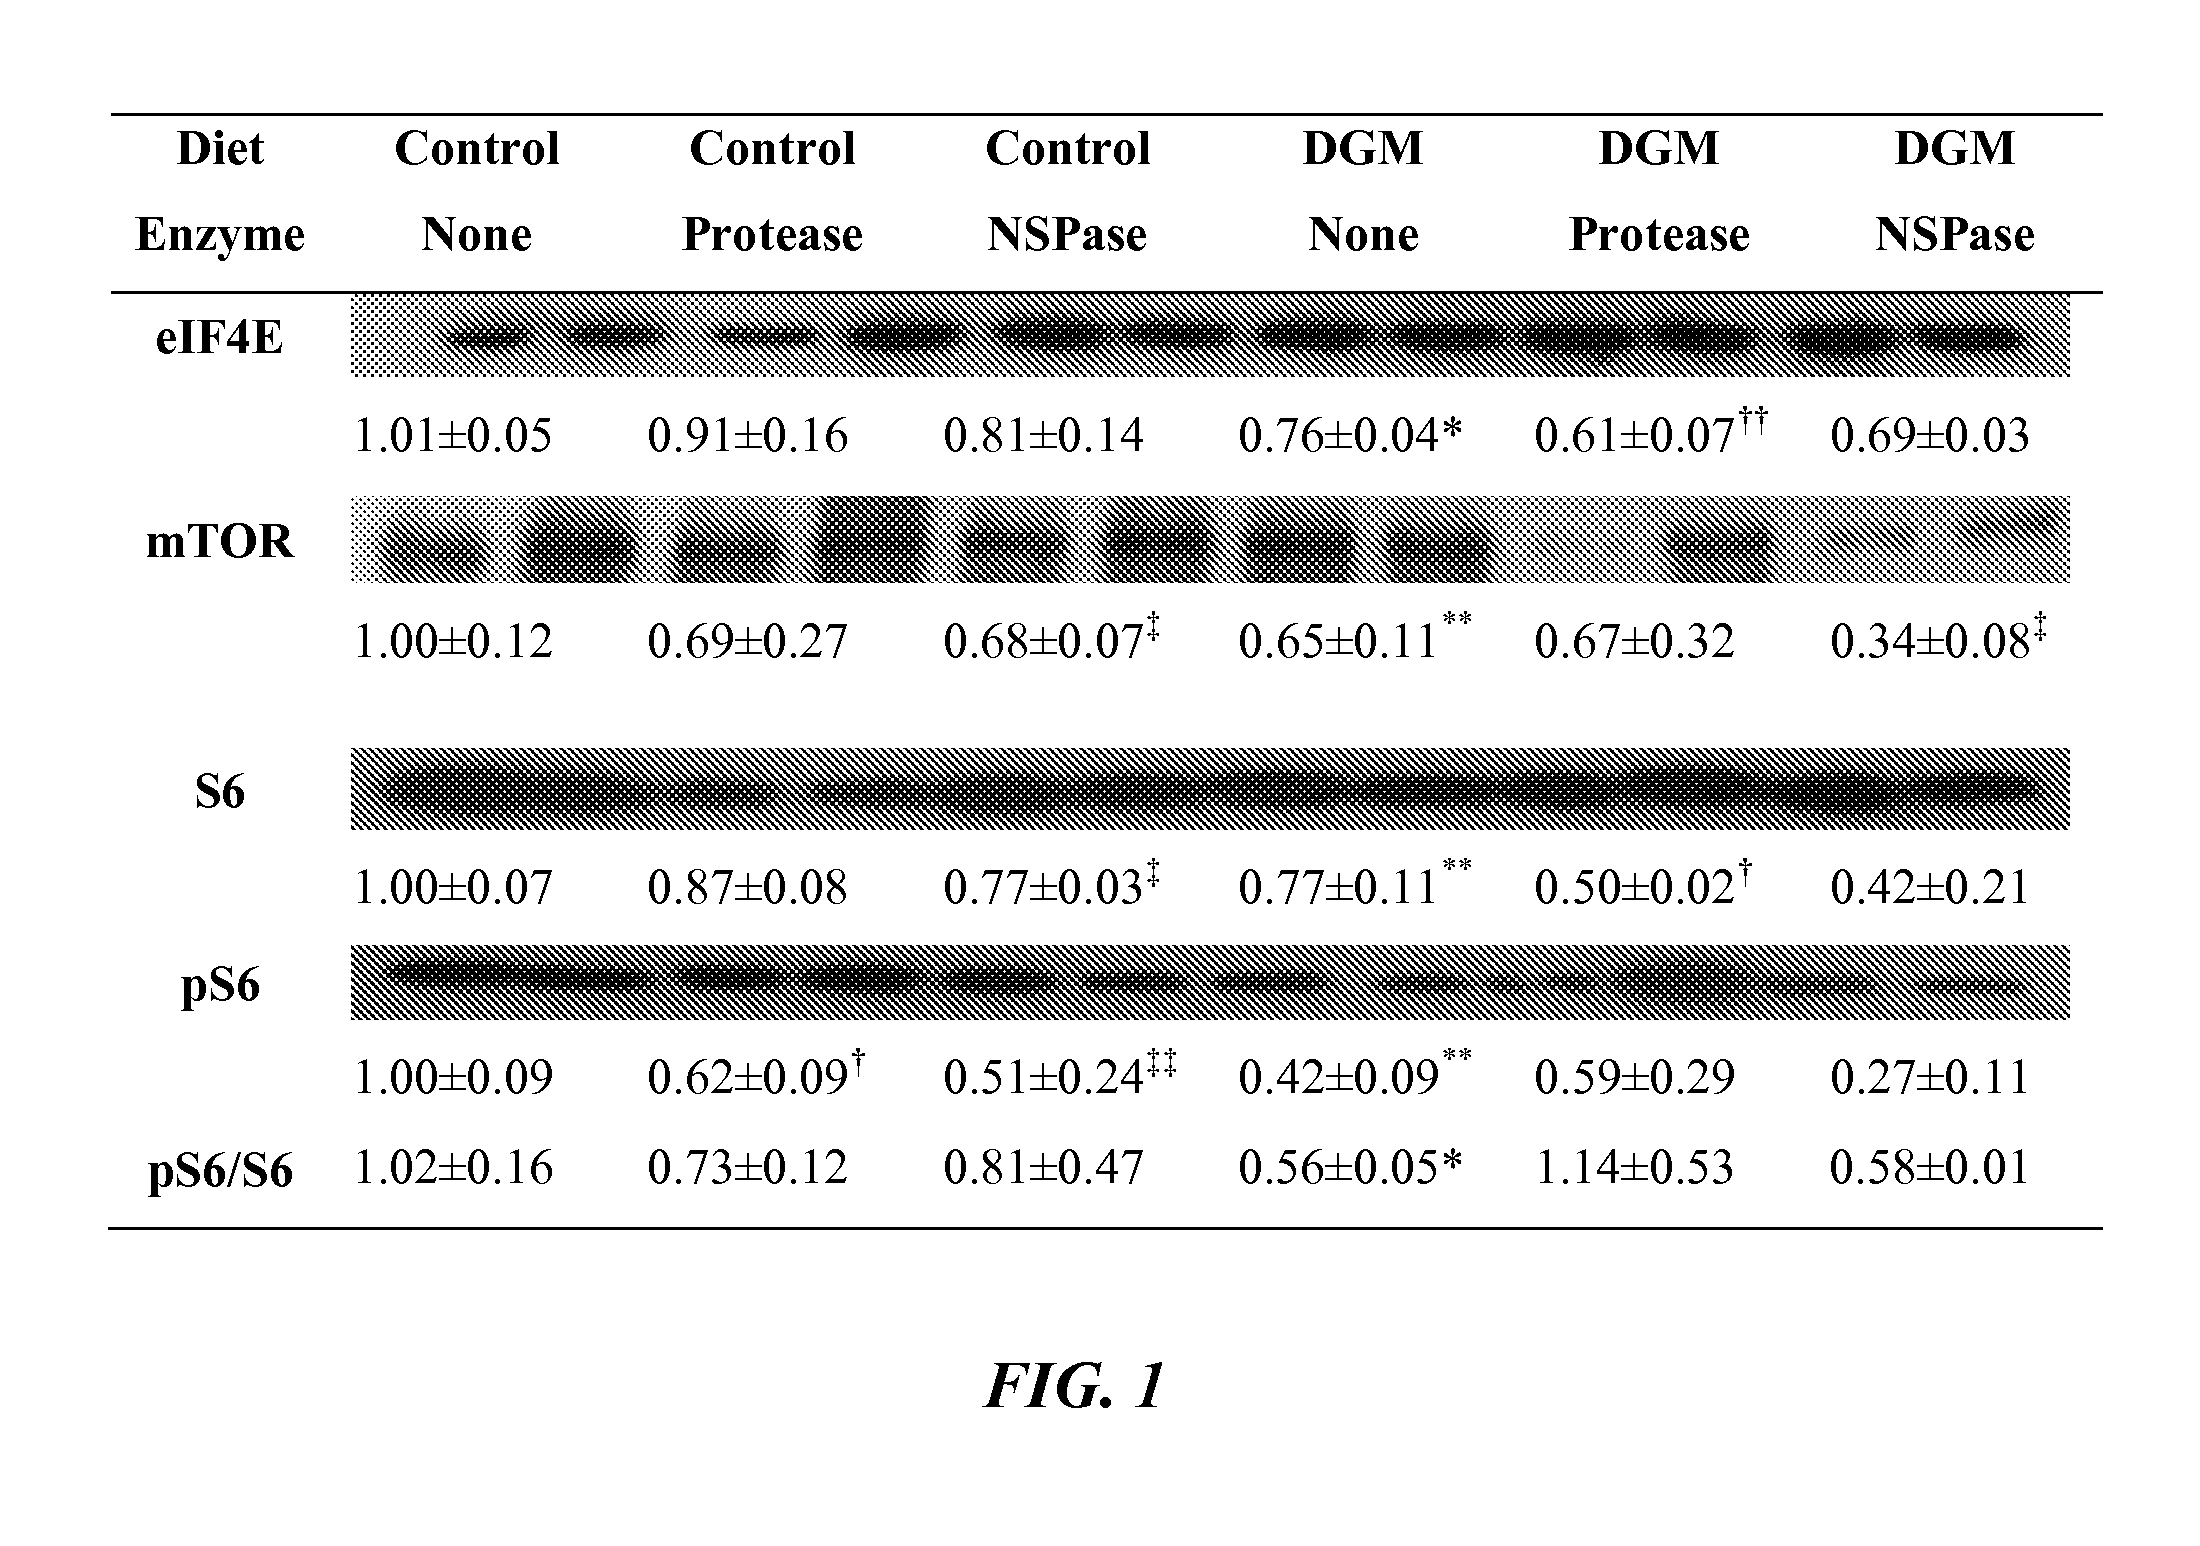 Algal-based animal feed composition containing exogenous protease animal feed supplement, and uses thereof